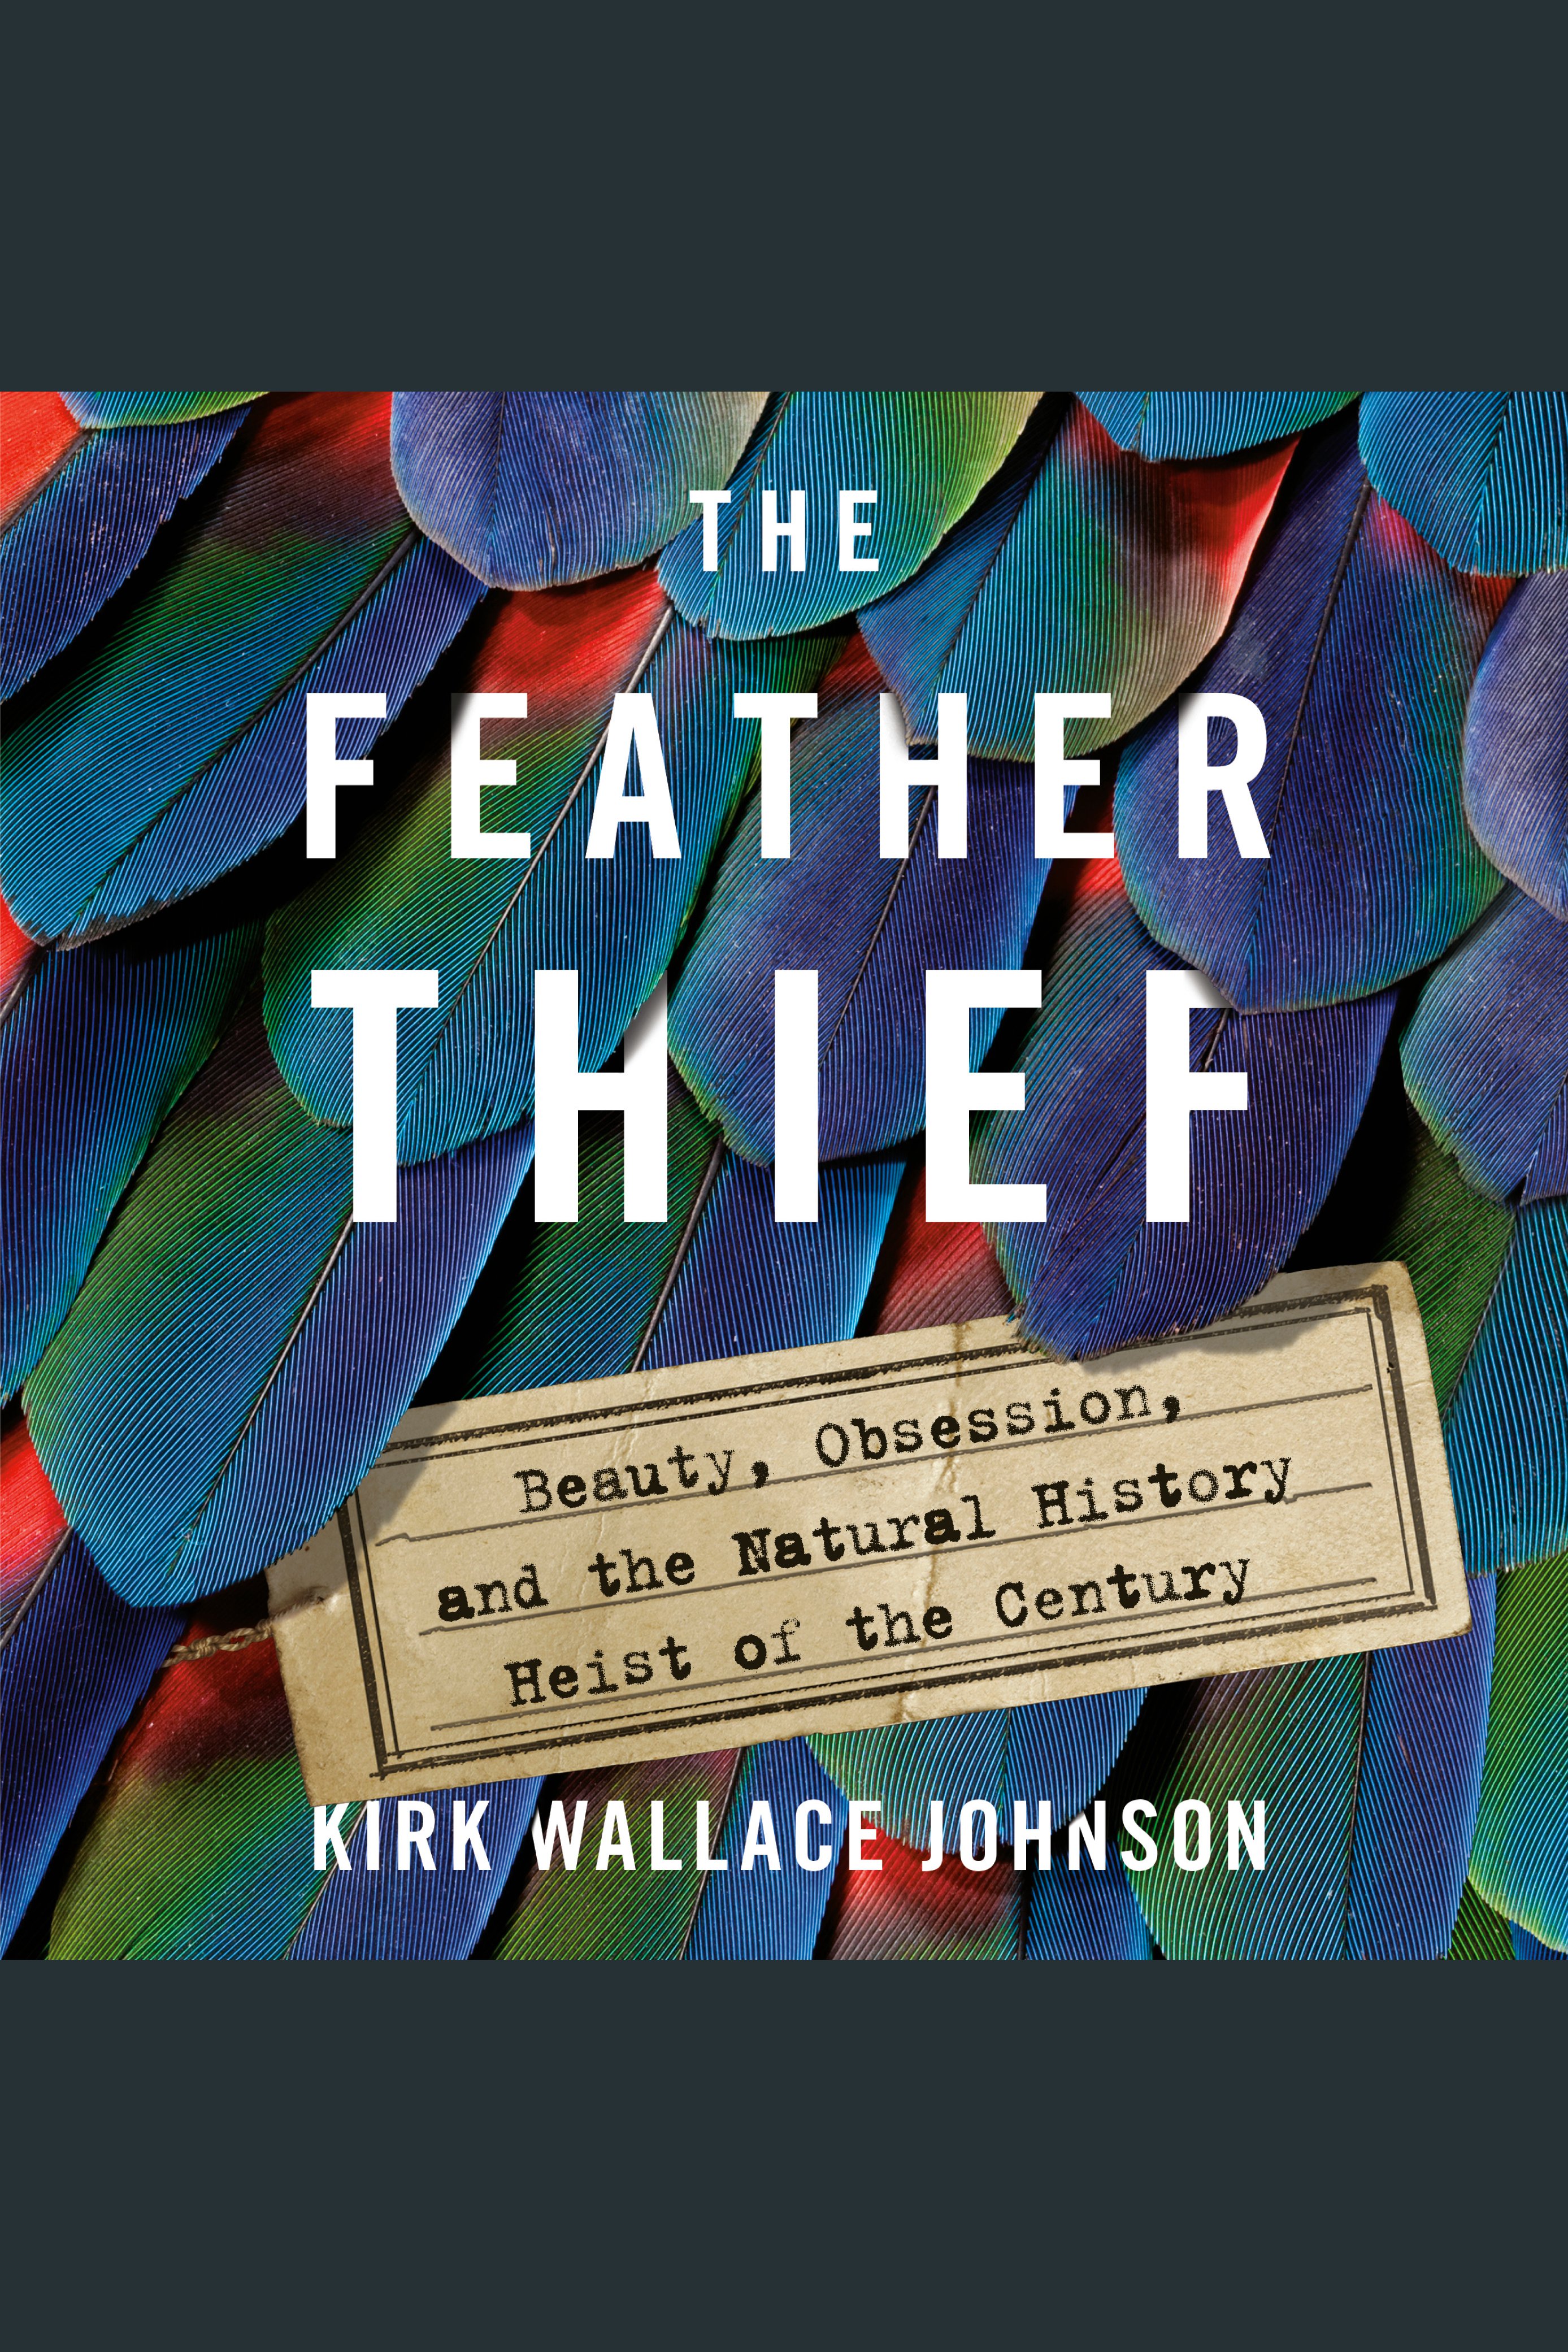 Imagen de portada para The Feather Thief [electronic resource] : Beauty, Obsession, and the Natural History Heist of the Century